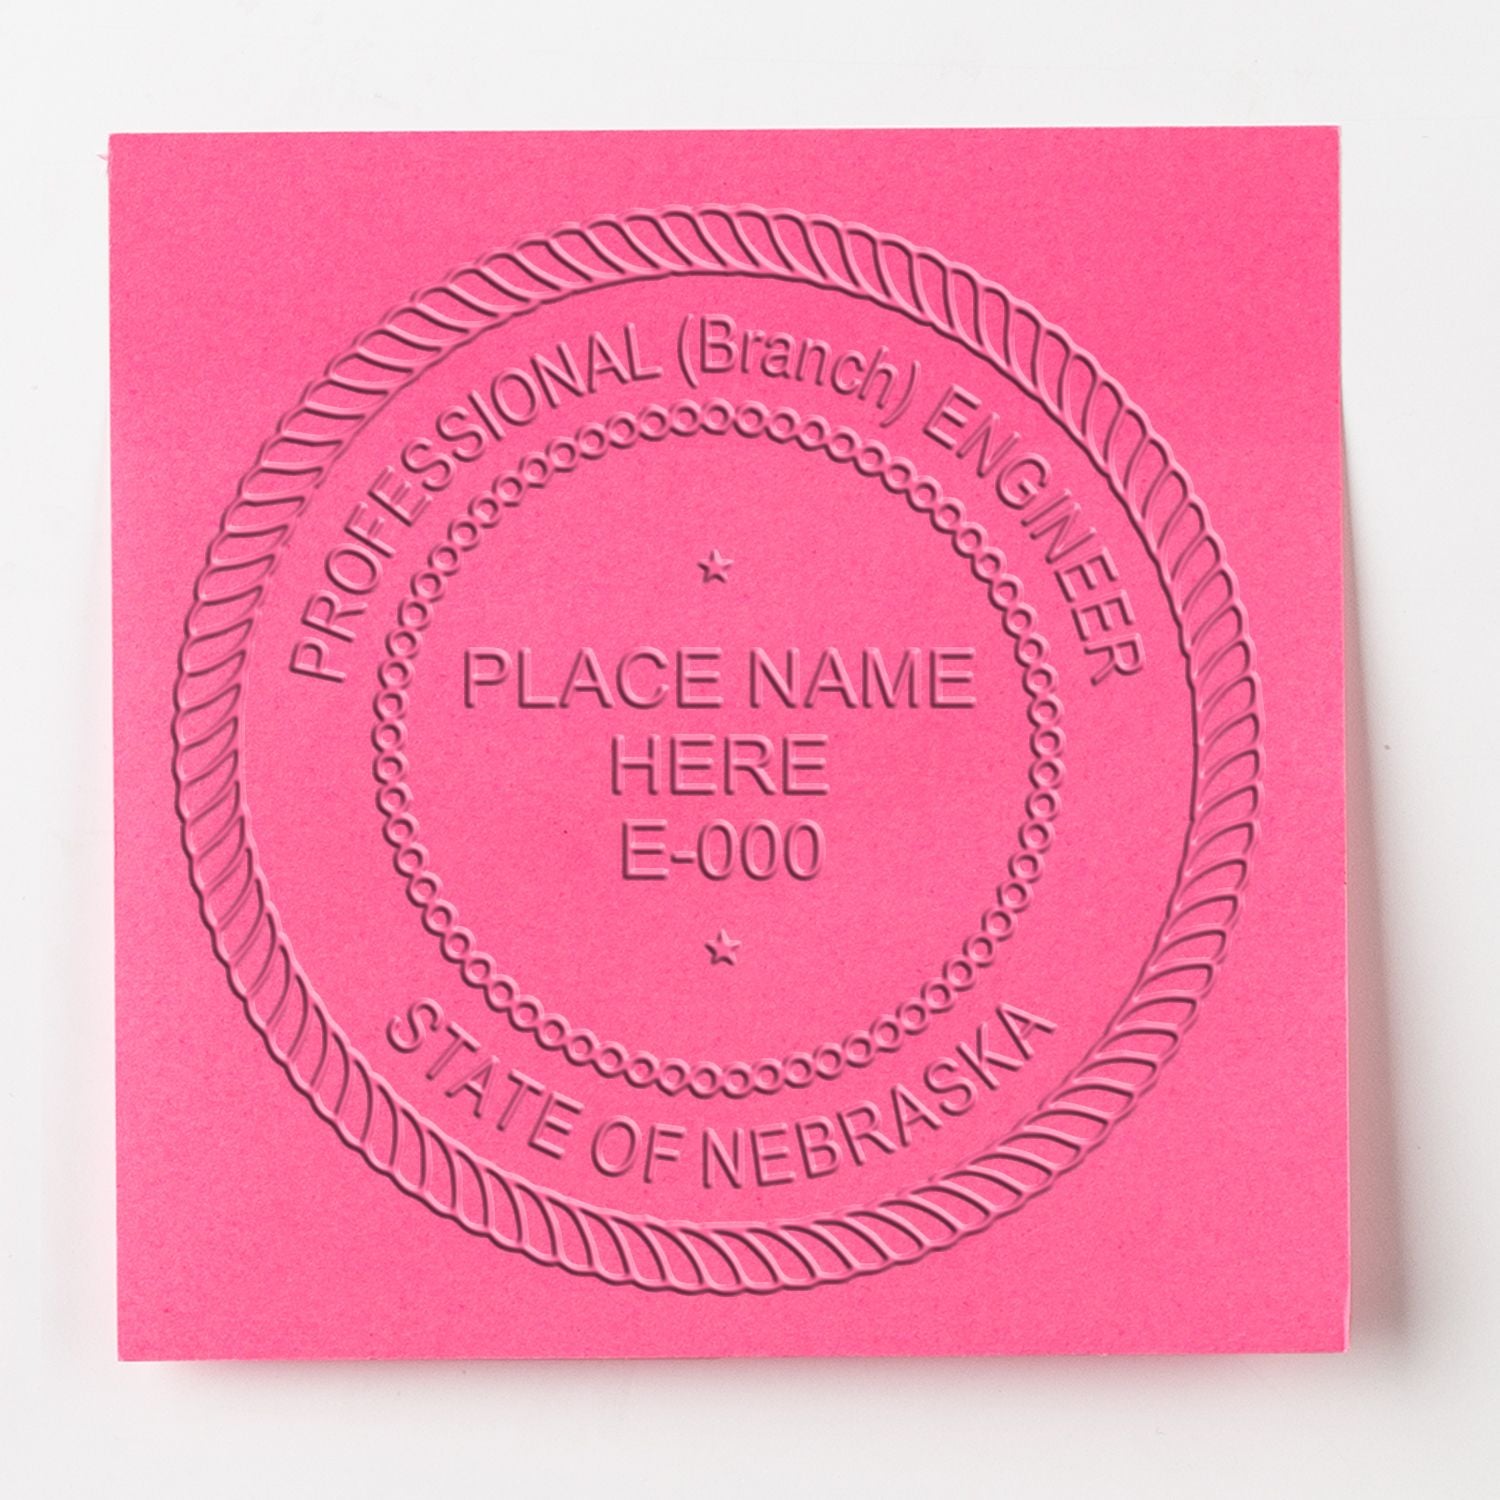 An in use photo of the Gift Nebraska Engineer Seal showing a sample imprint on a cardstock